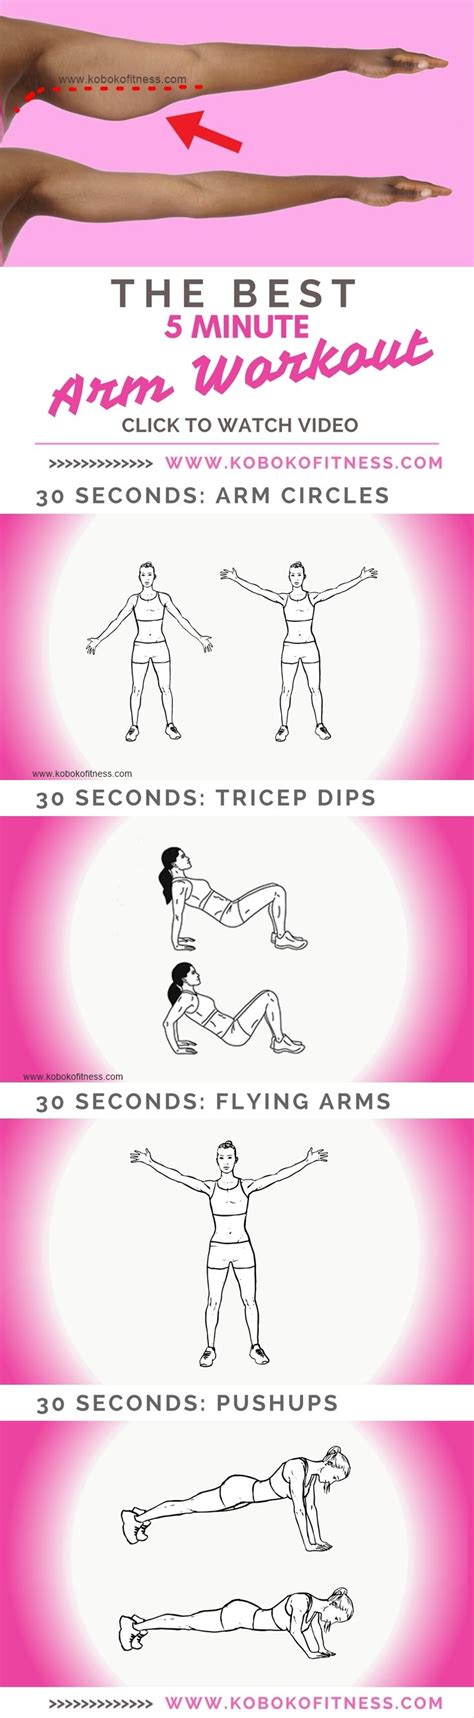 Watch the form shown by the why it's a winner: 5 Minute Arm Workout for Perfect, Toned Arms - Get Healthy ...